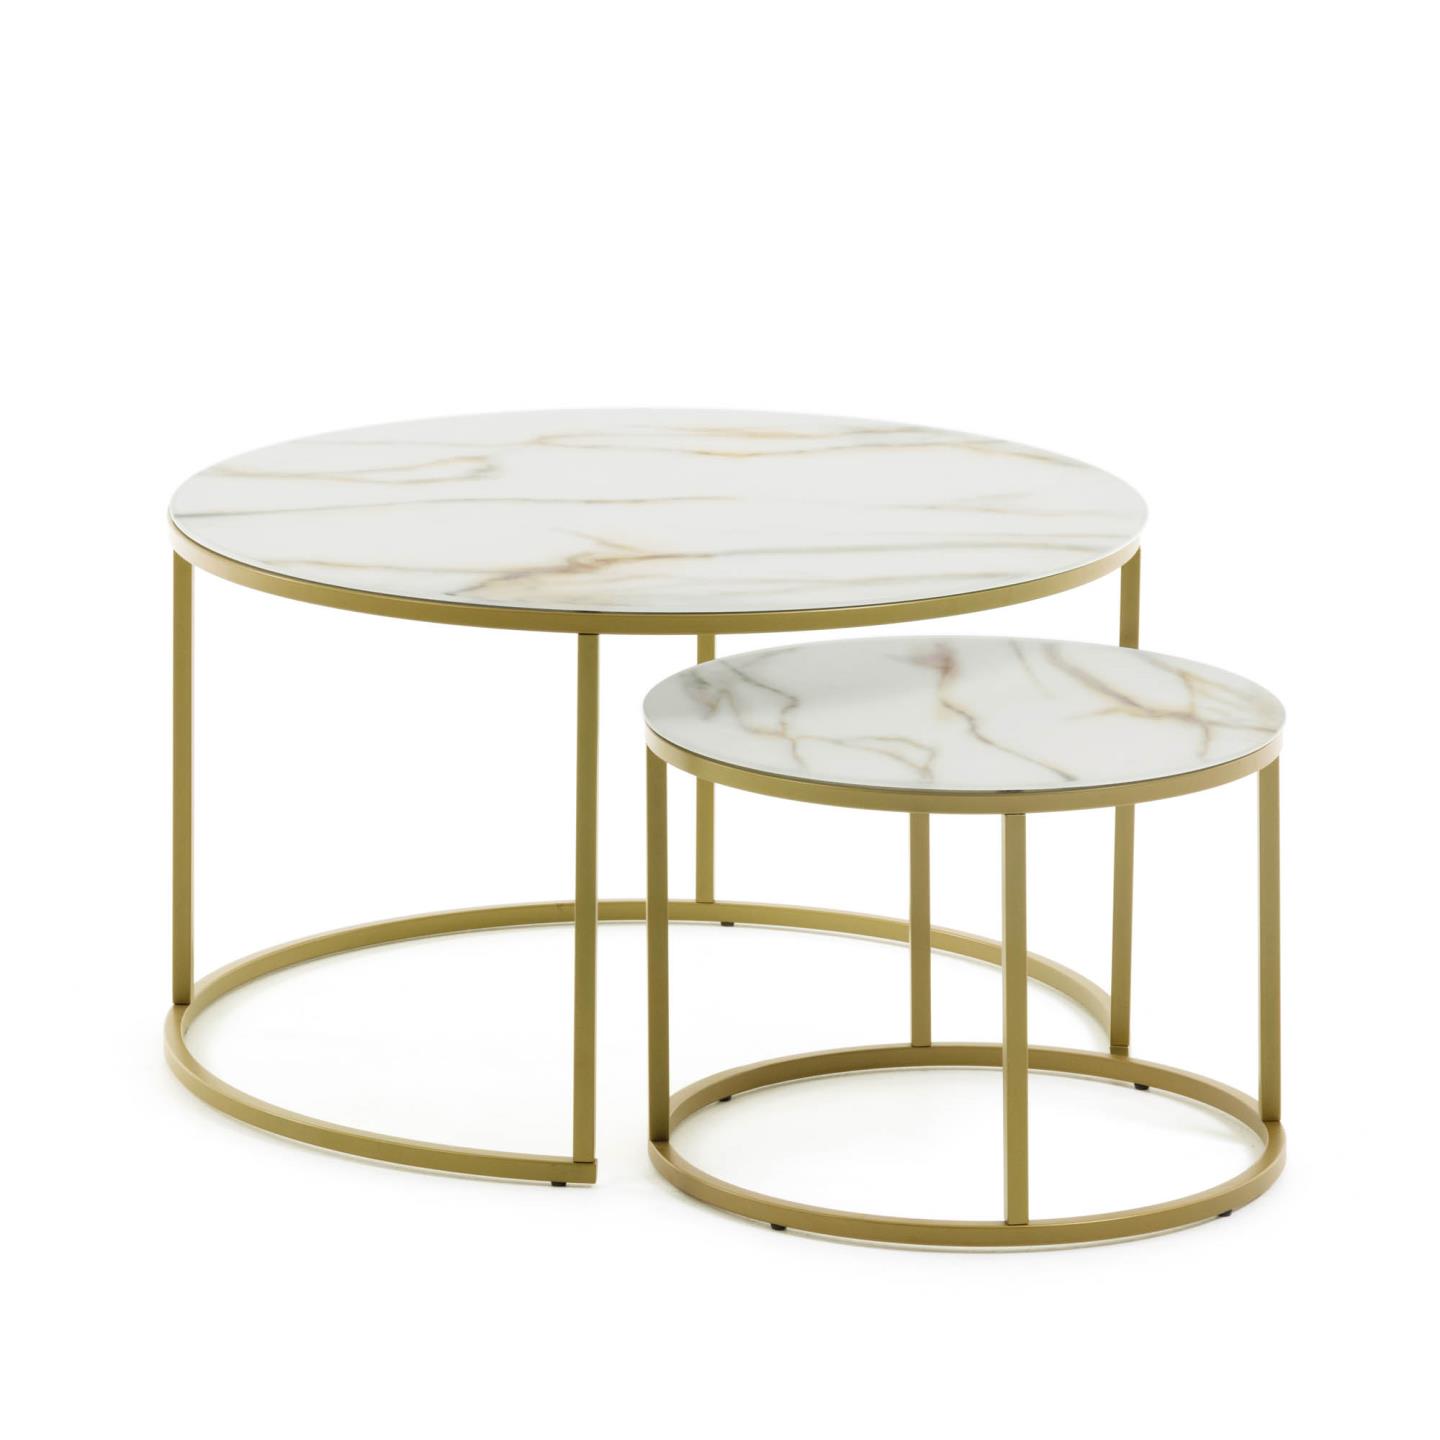 Set of 2 Leonor glass side tables in white and golden steel structure Ø 80 cm / Ø 50 cm